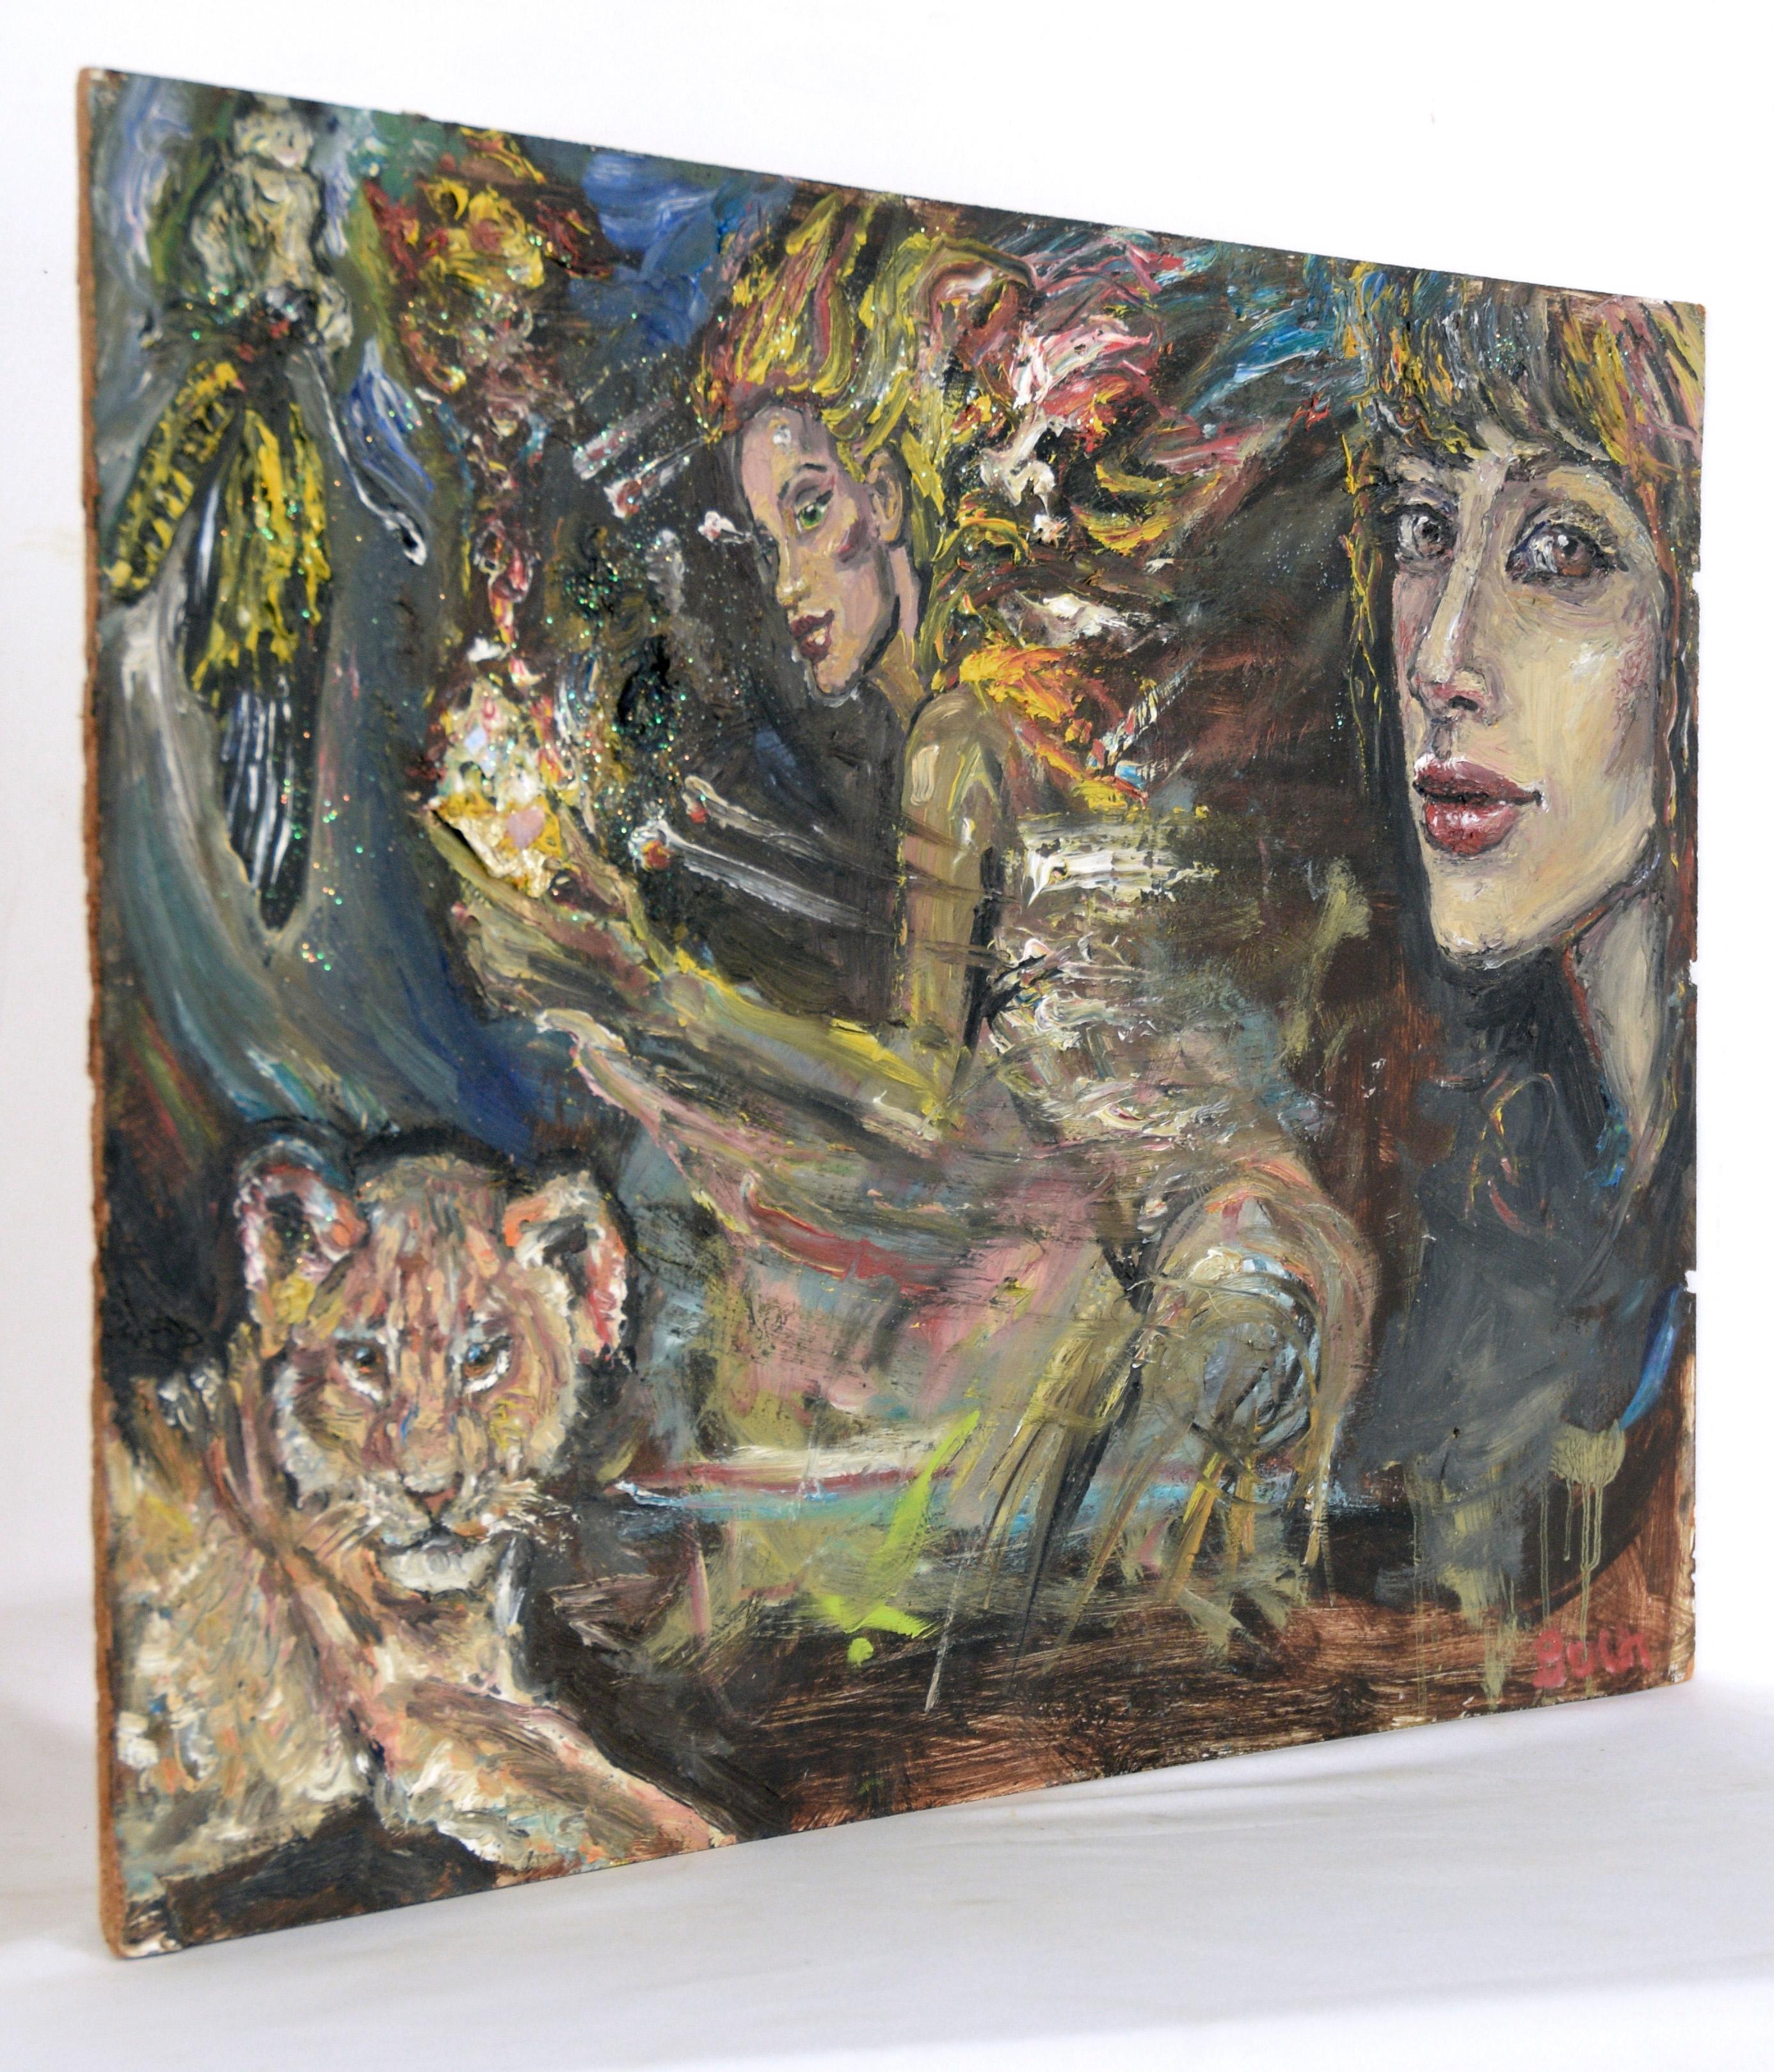 Women and a Tiger Cub - Pop Art in Oil and Mixed Media on Masonite For Sale 3